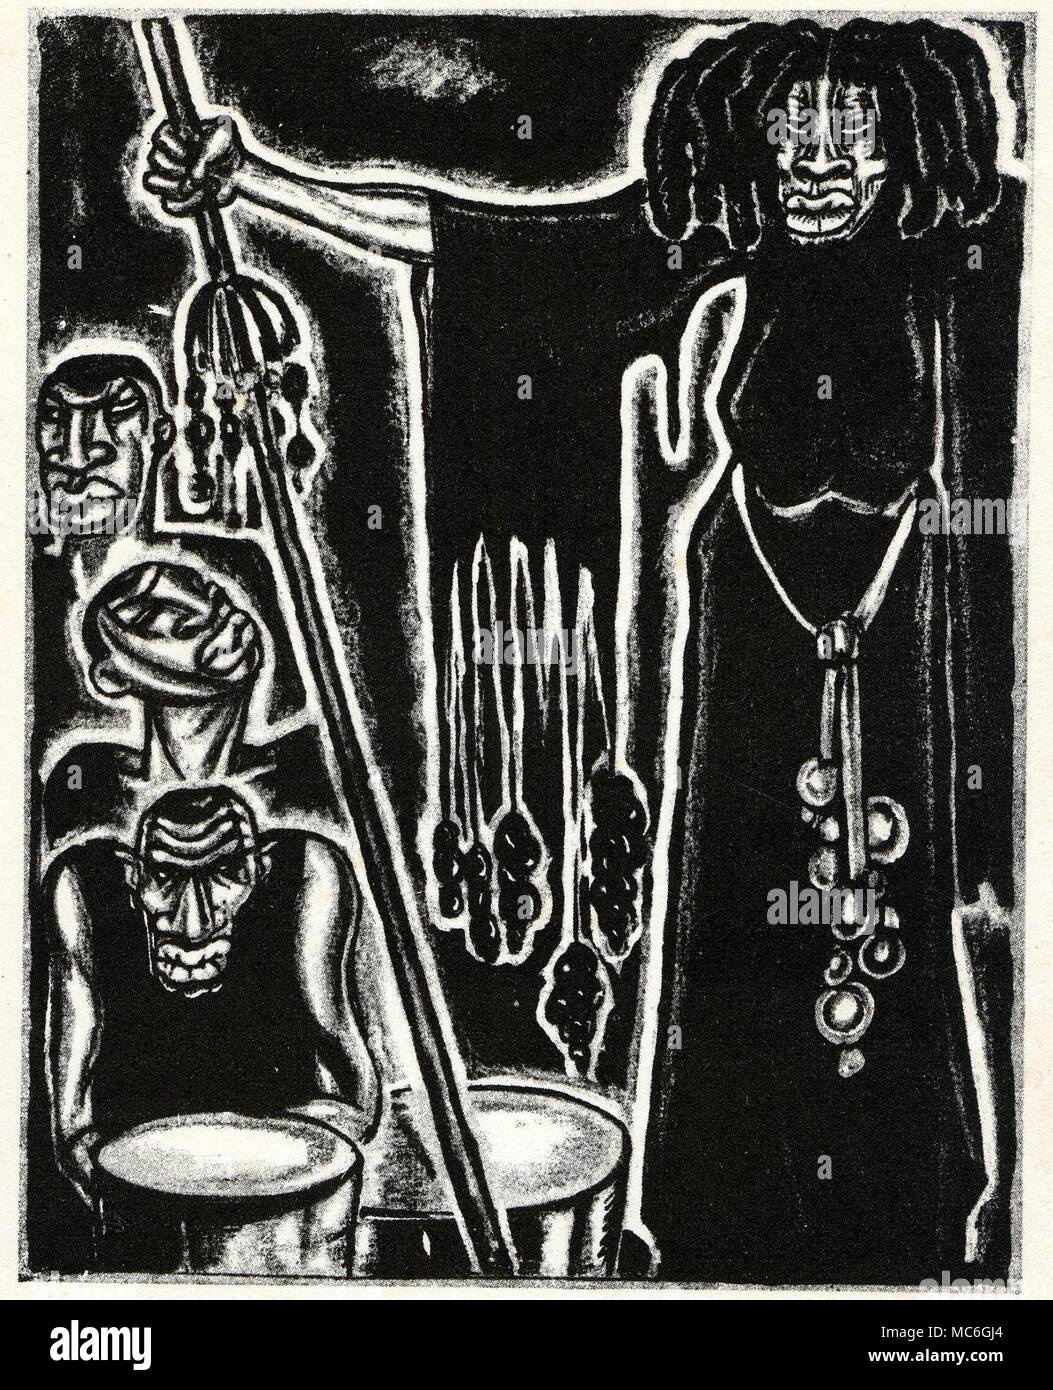 VOODOO - MAMALOI The mamaloi, or Voodoo priest, participating in a ceremonial processional, dressed in a scarlet robe and feathered head-dress, making the equivalent of a dervish dance as she approached the altar. Illustration by A. King, for W.B. Seabrook, The Magic Island, 1929. Stock Photo